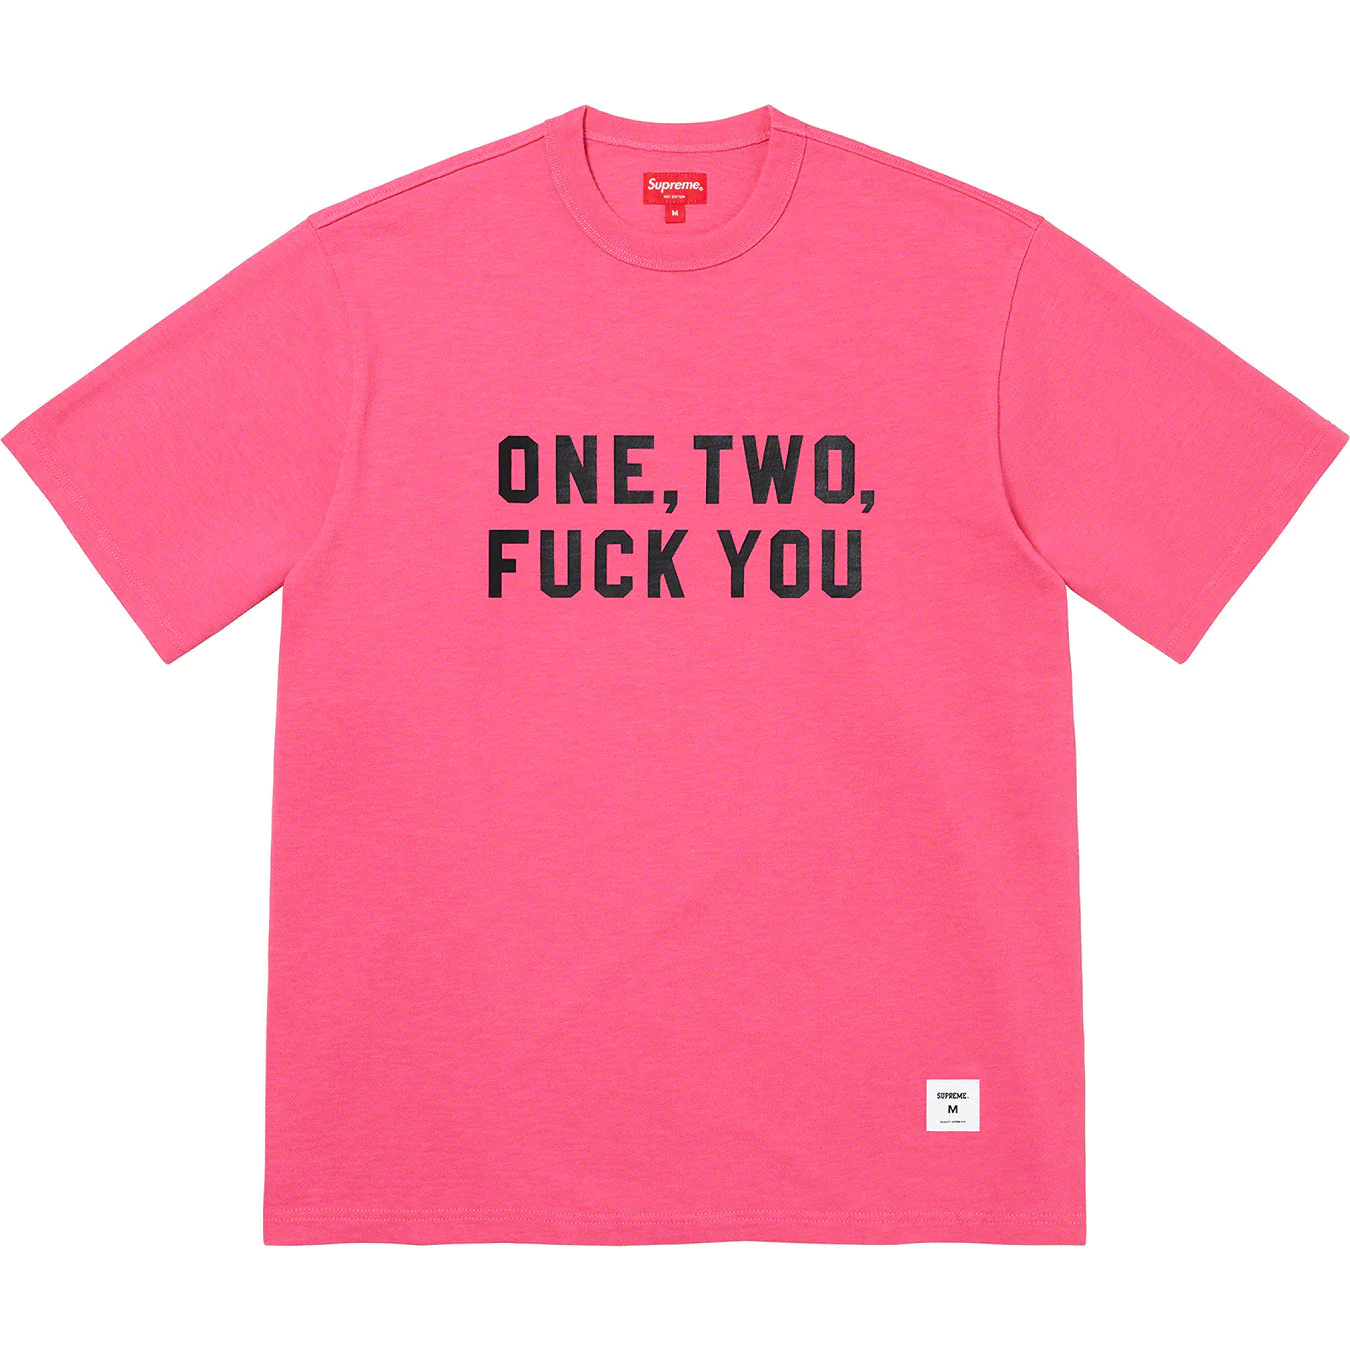 Supreme One Two Fuck You S/S Top